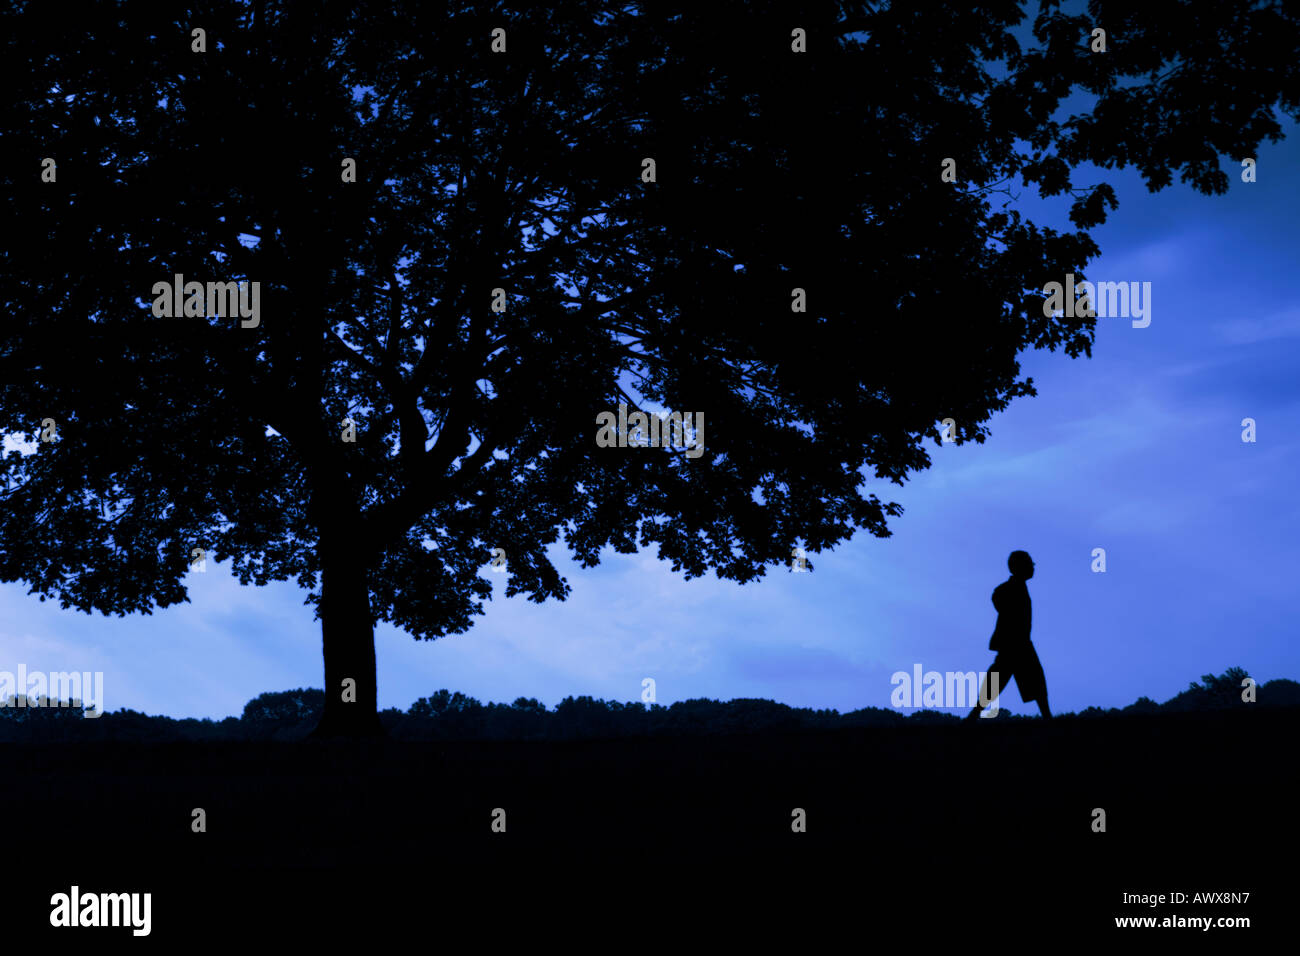 silhouette of person walking along under a very large tree in early evening nighttime sky Stock Photo